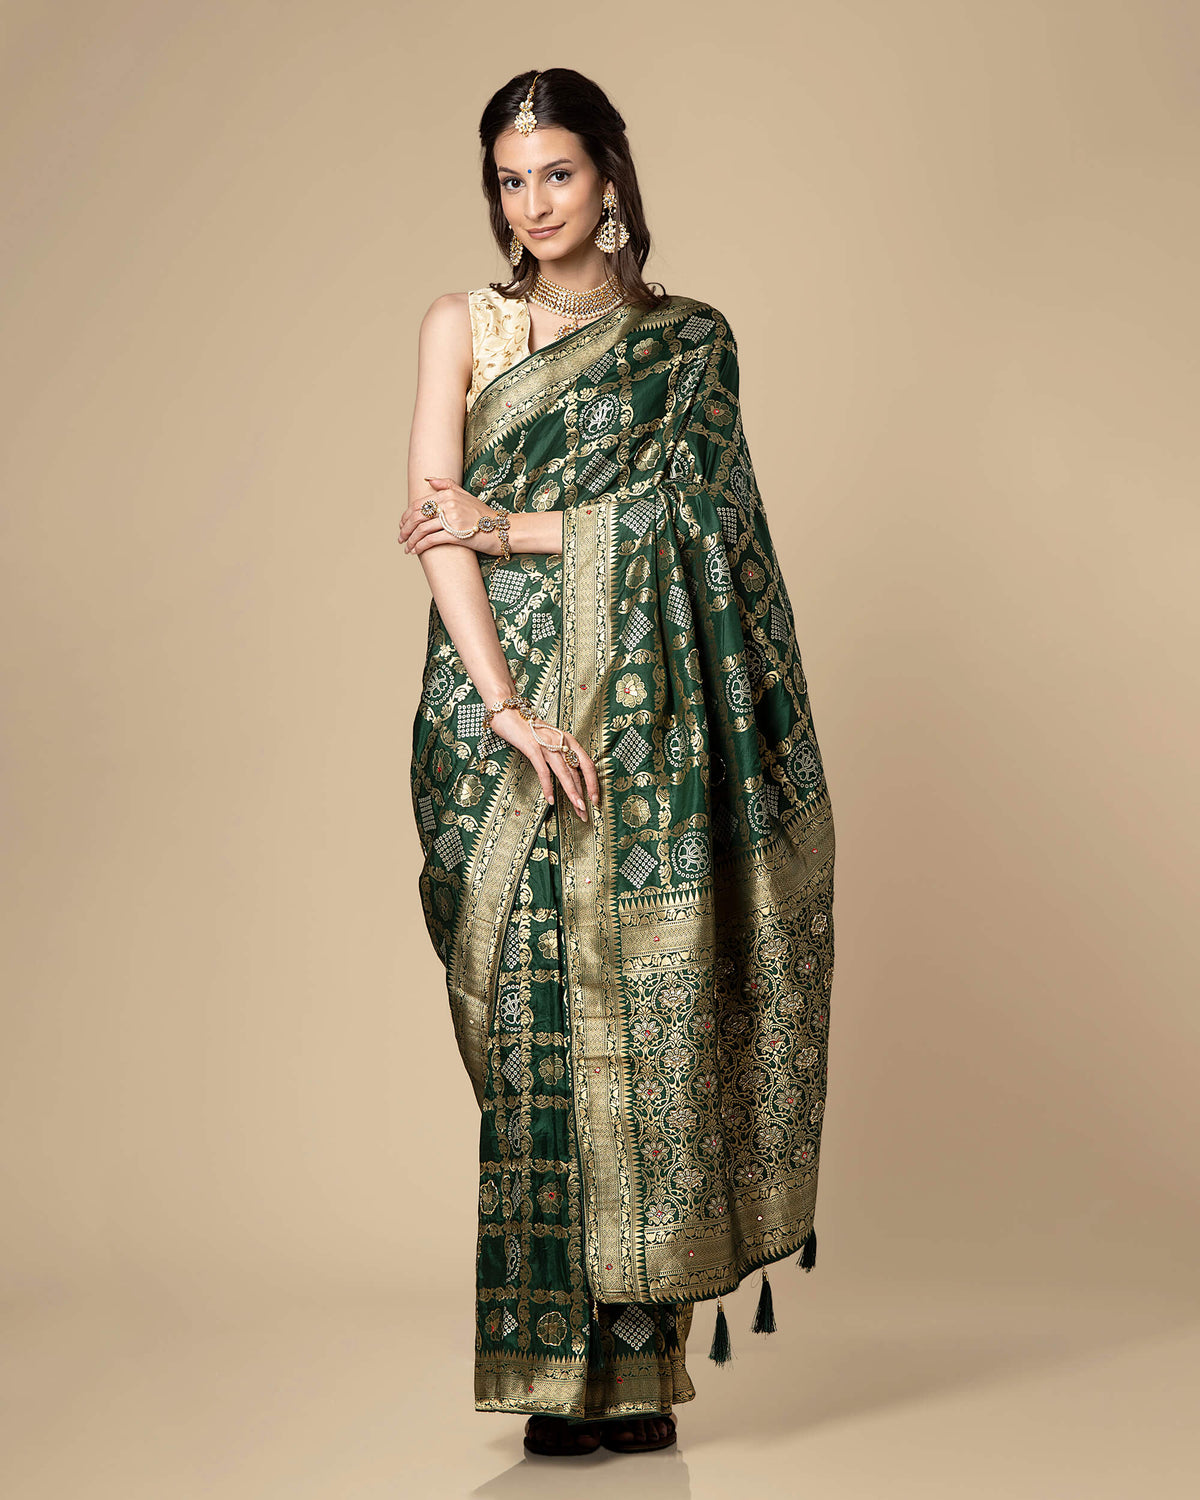 Green Bandhani Golden Jacquard Work with Delica Beads Exclusive Silk Saree